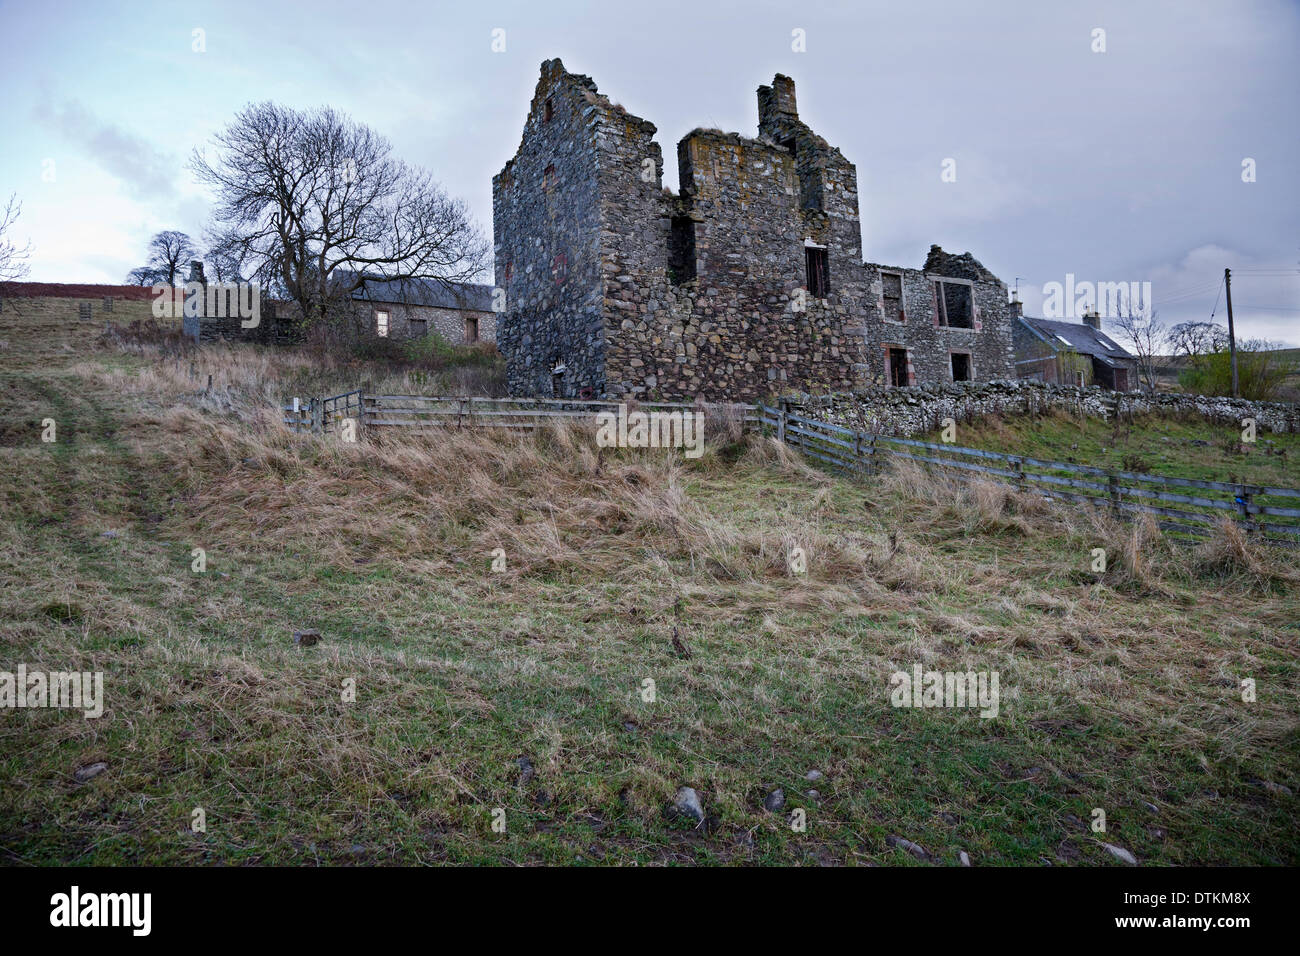 Ruined buildings in the Scottish Borders, near Galashiels Stock Photo